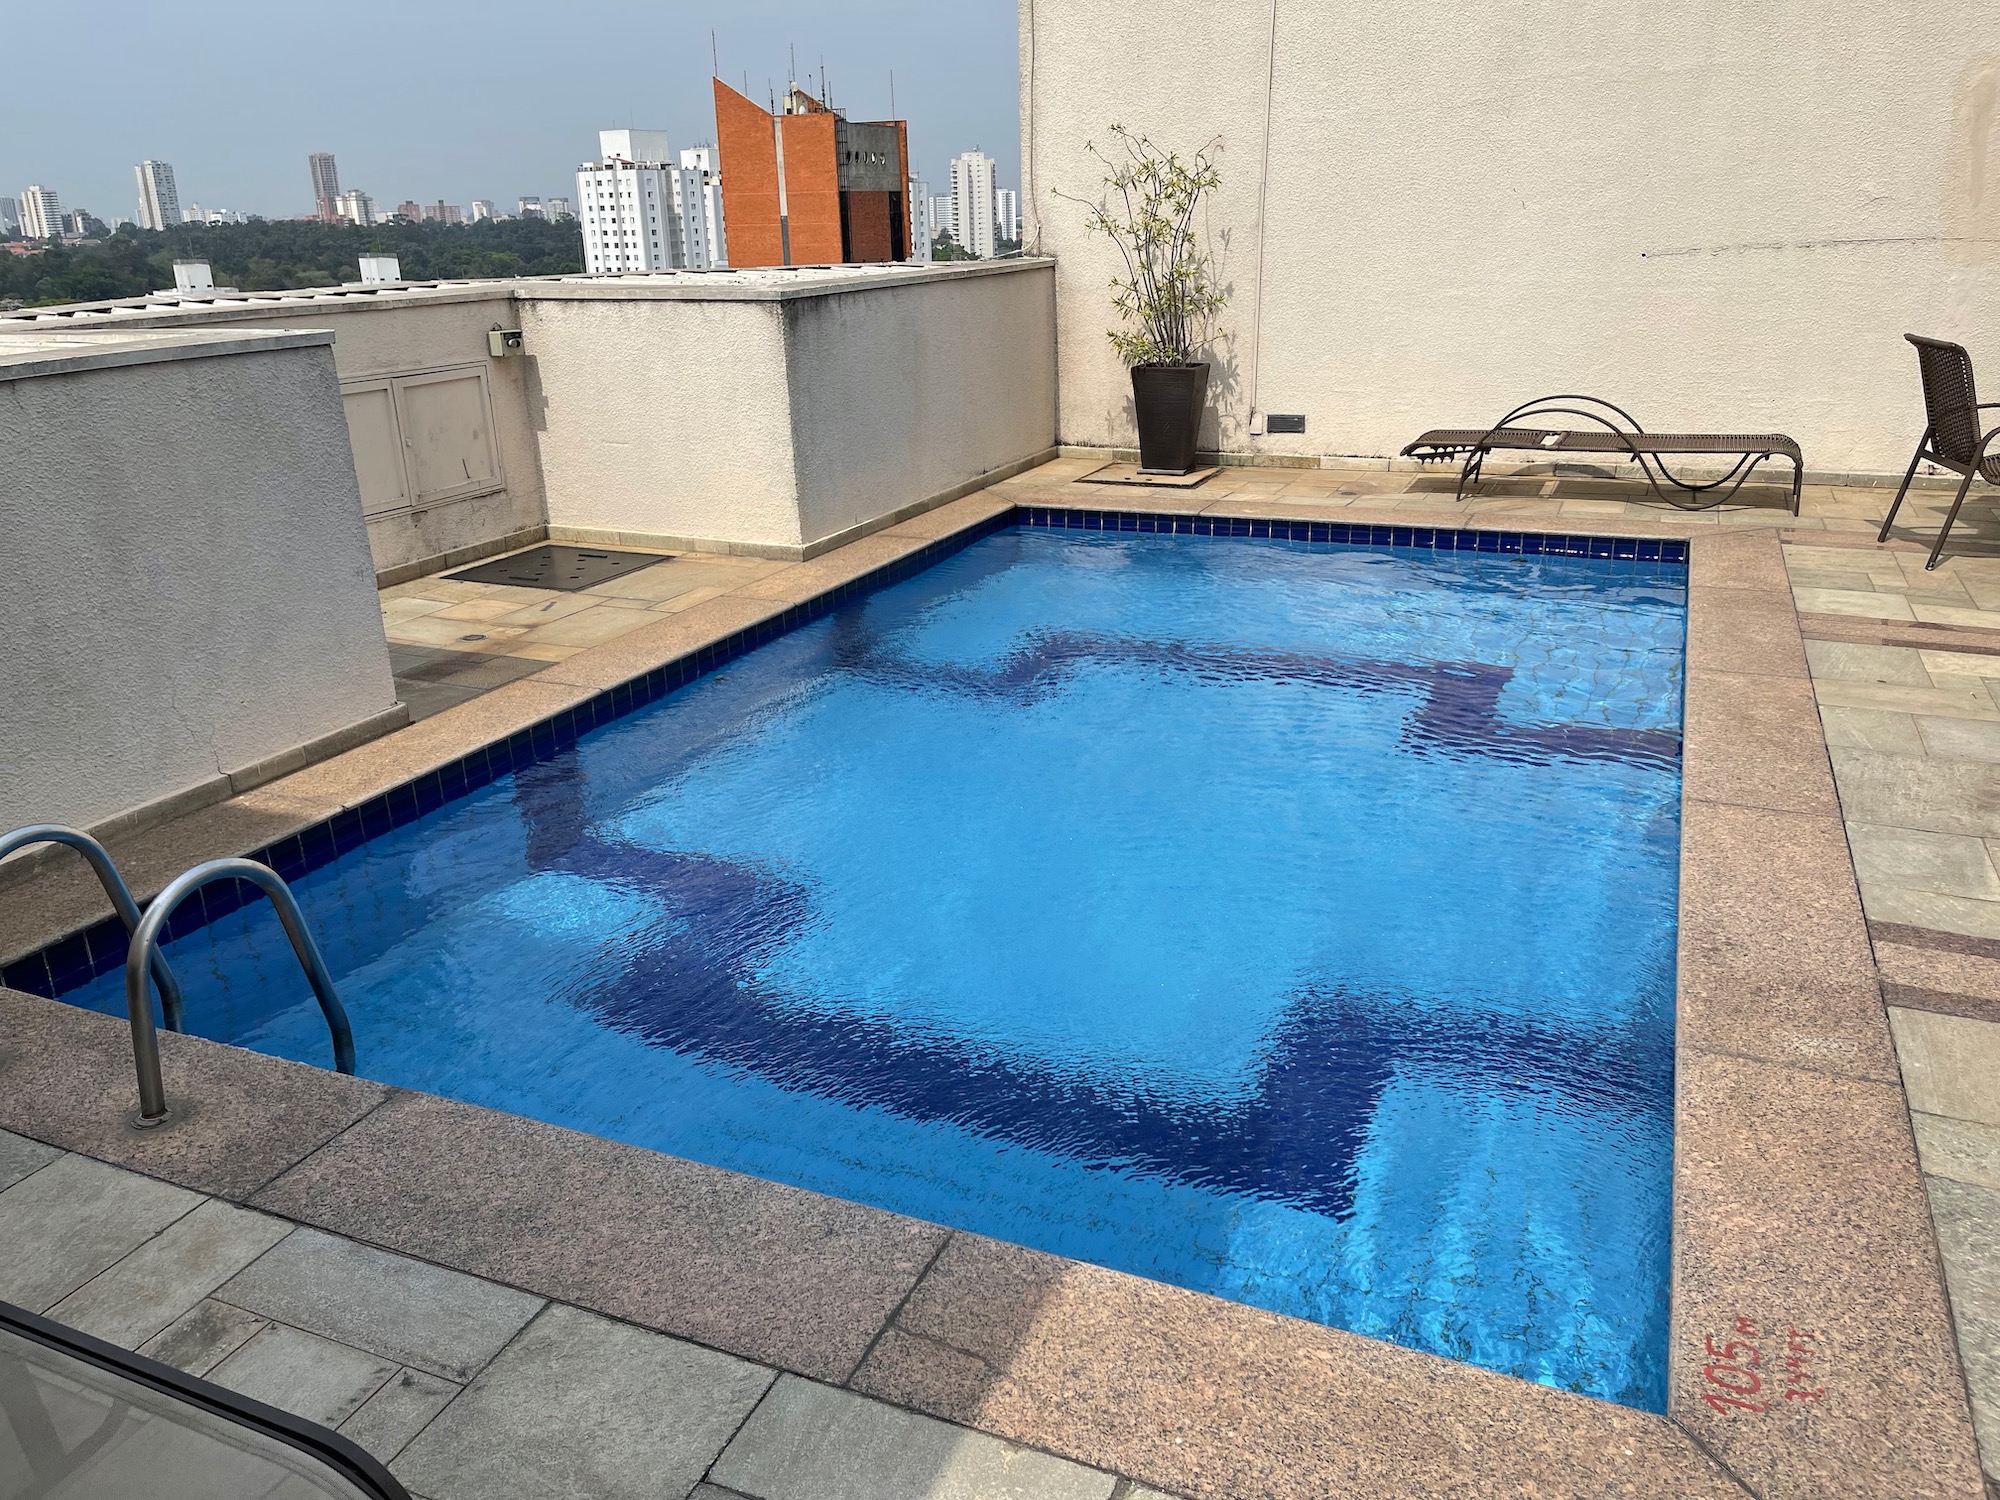 a swimming pool on a rooftop